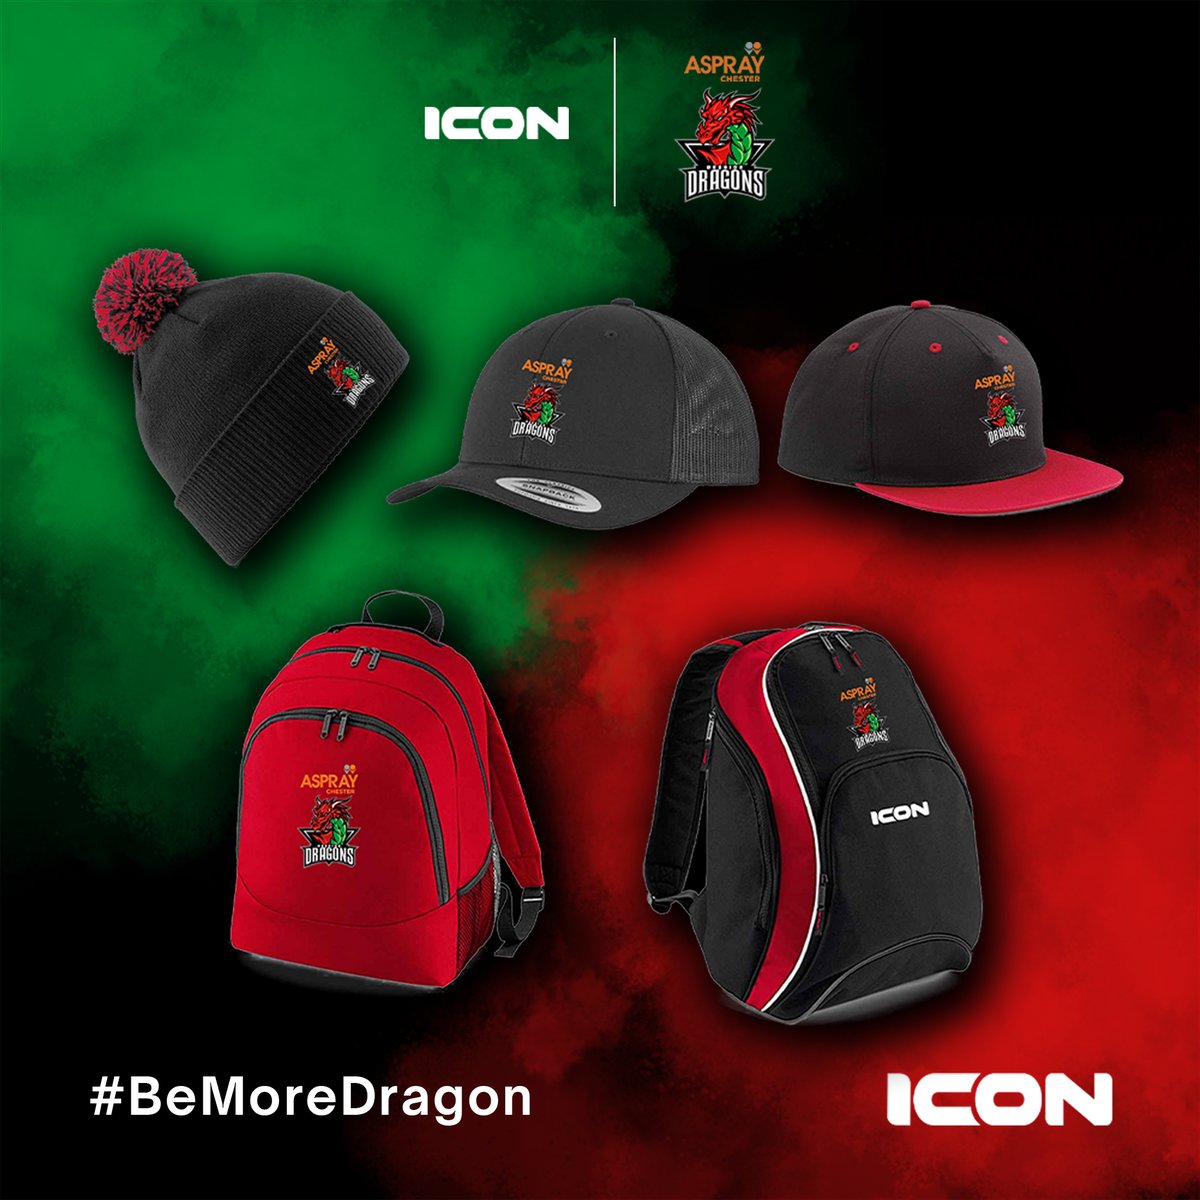 🌟All aboard with the new supporters' range in collaboration with @dragonsihc 🐉 #iconsports #iconsportsuk #iconsportswales #strengthinunity #BeMoreDragon